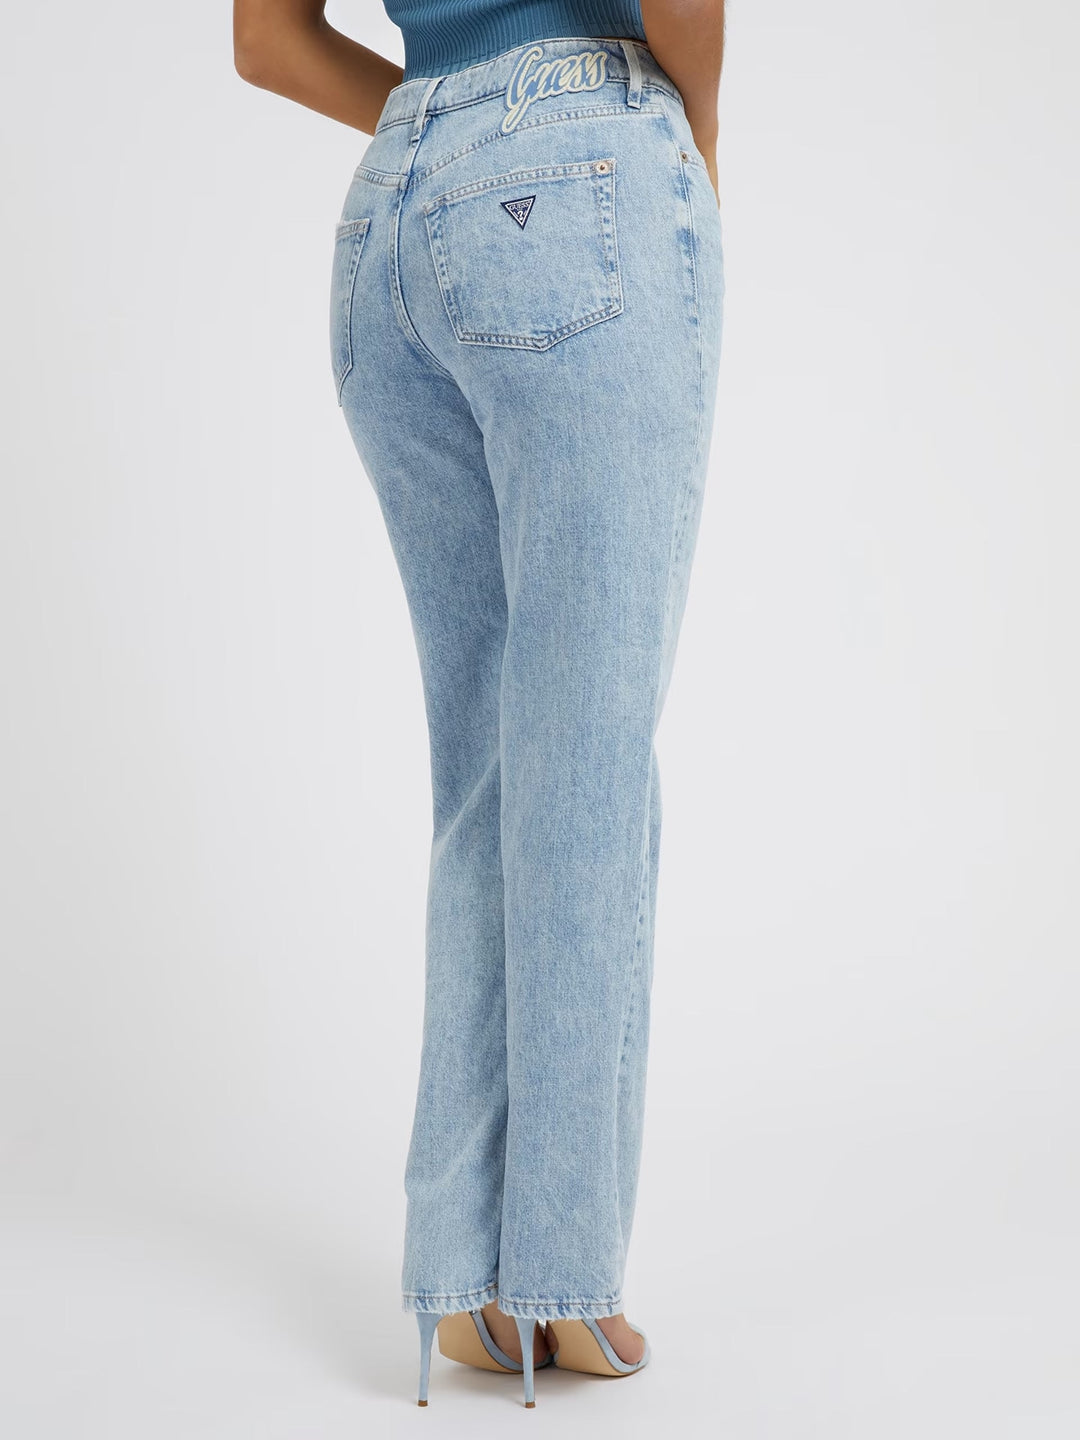 HOLLYWOOD RELAXED FIT DENIM PANTS - Guess